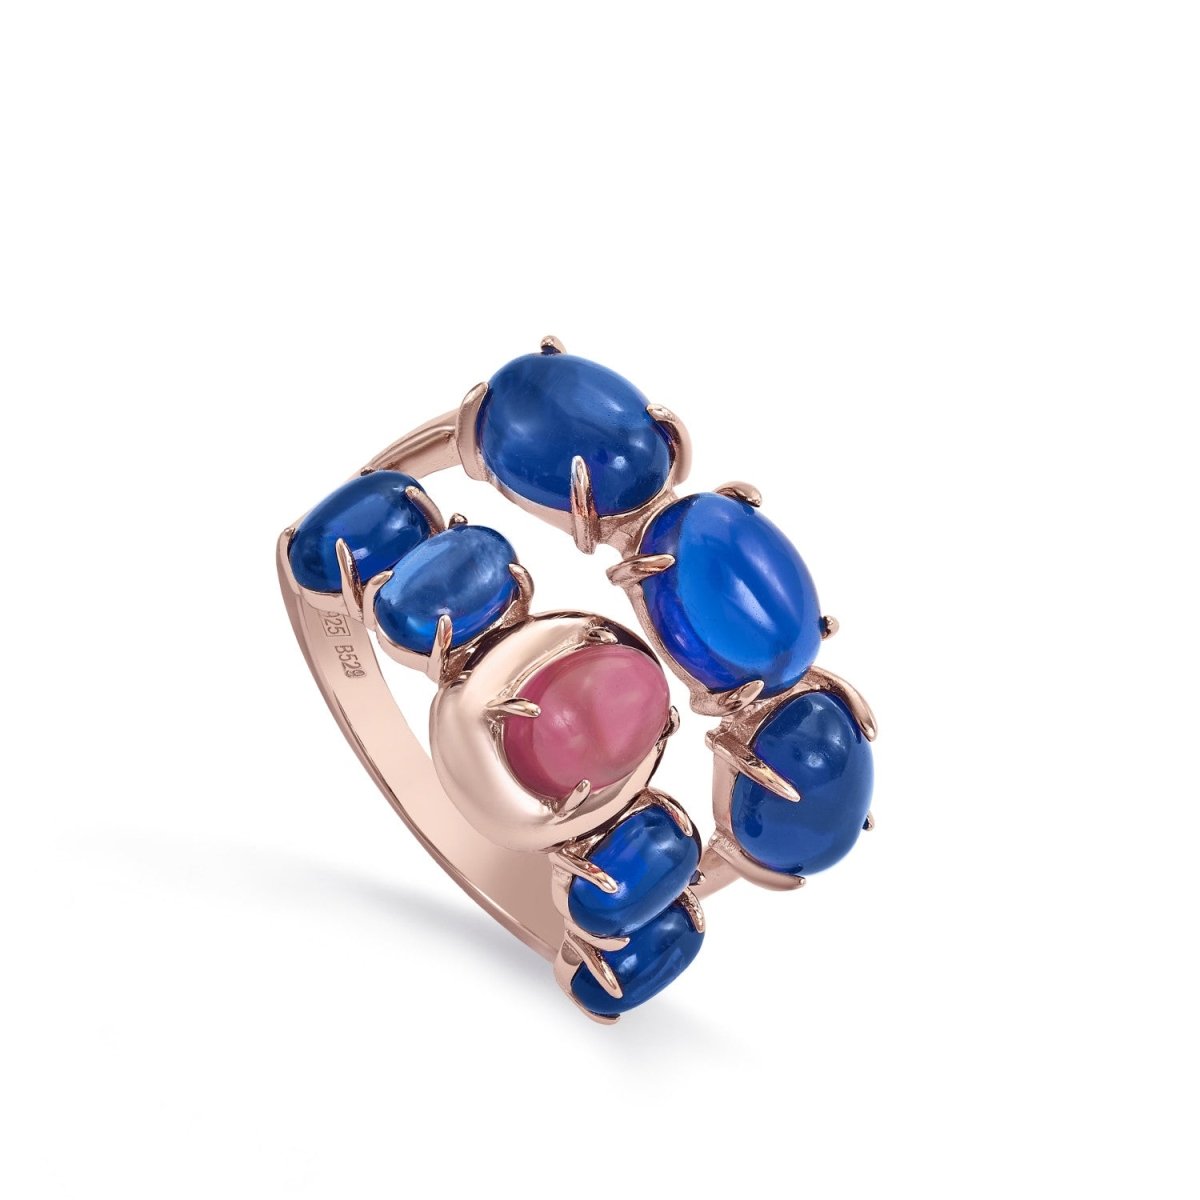 Ring - Rings with azurite stones and zircons